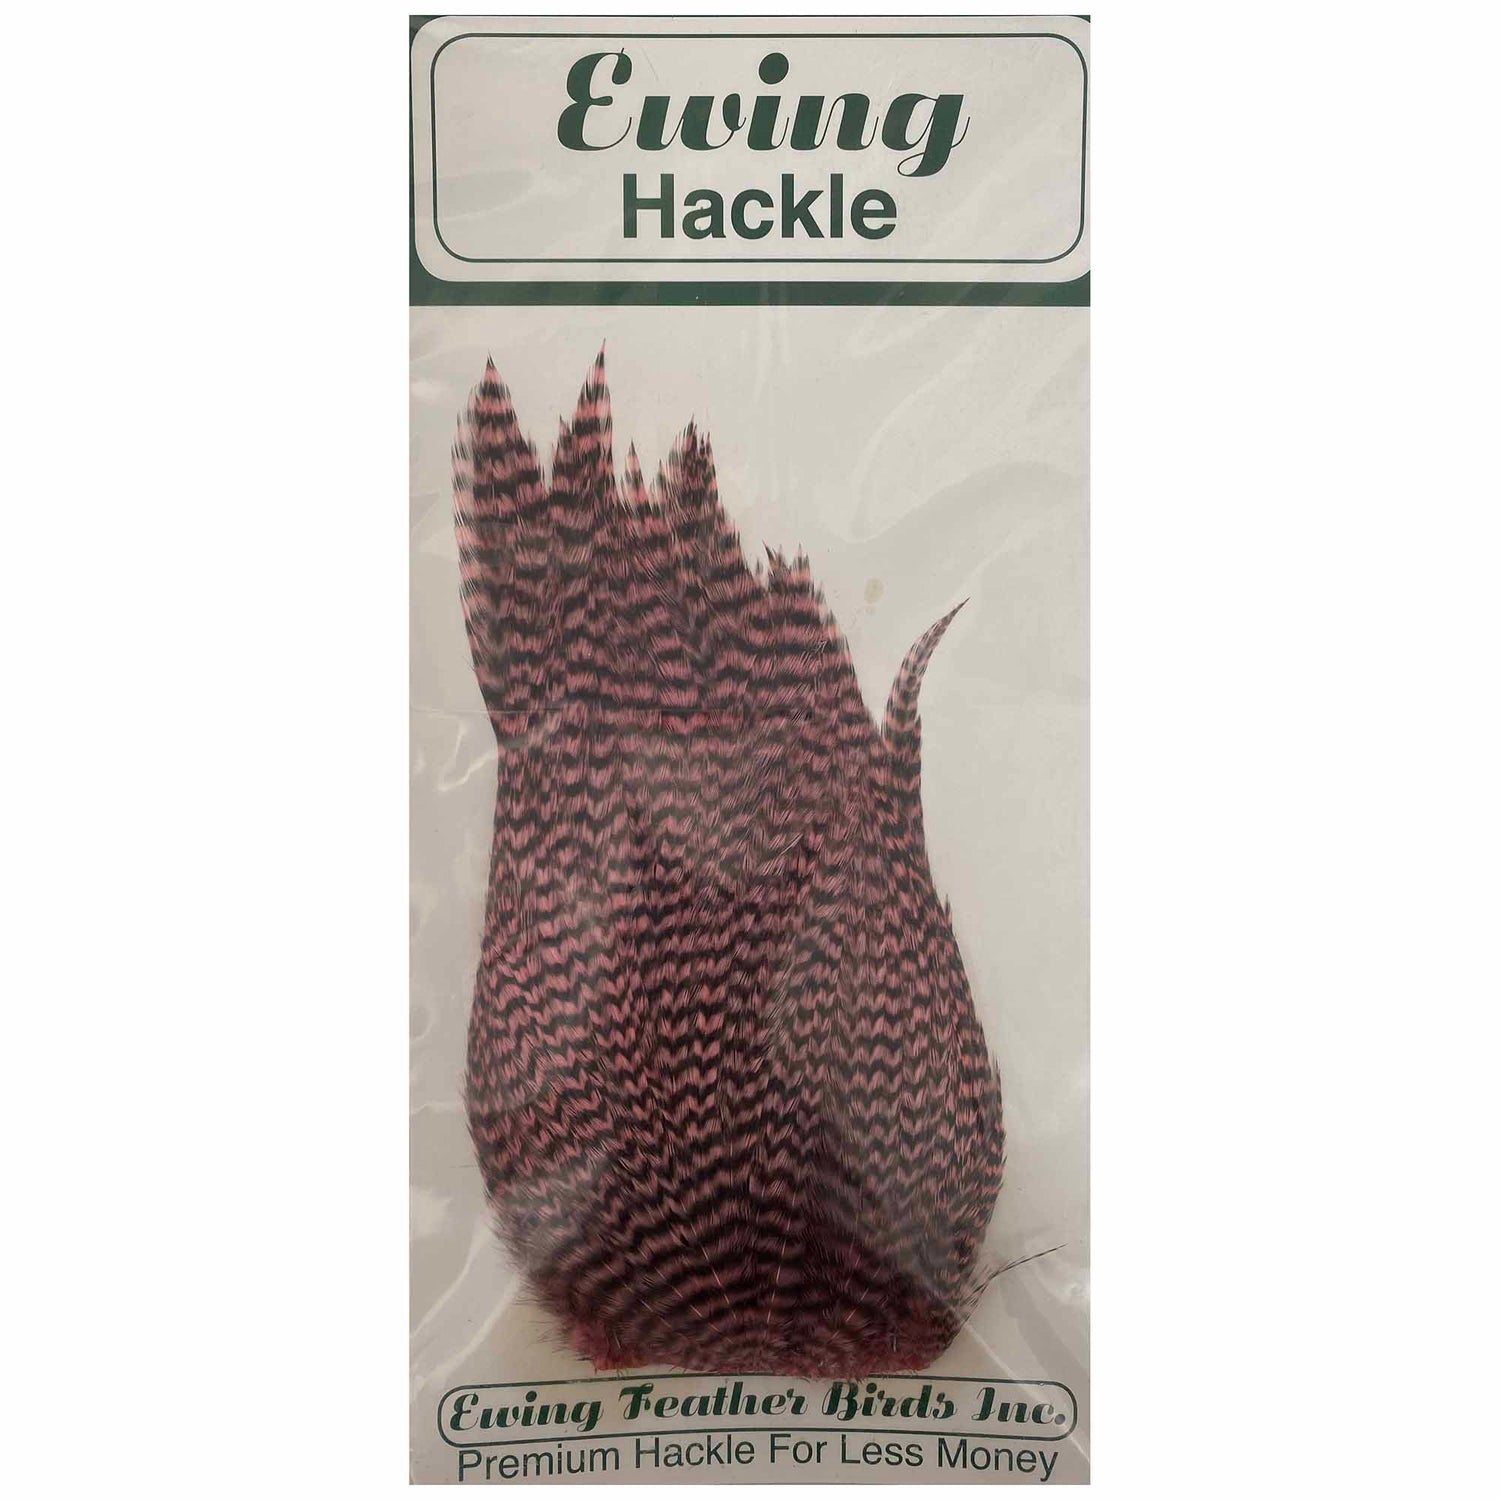 Ewing Hackle Deceiver Patch-Fly Fishing - Fly Tying Material-Ewing Hackle-White-Fishing Station